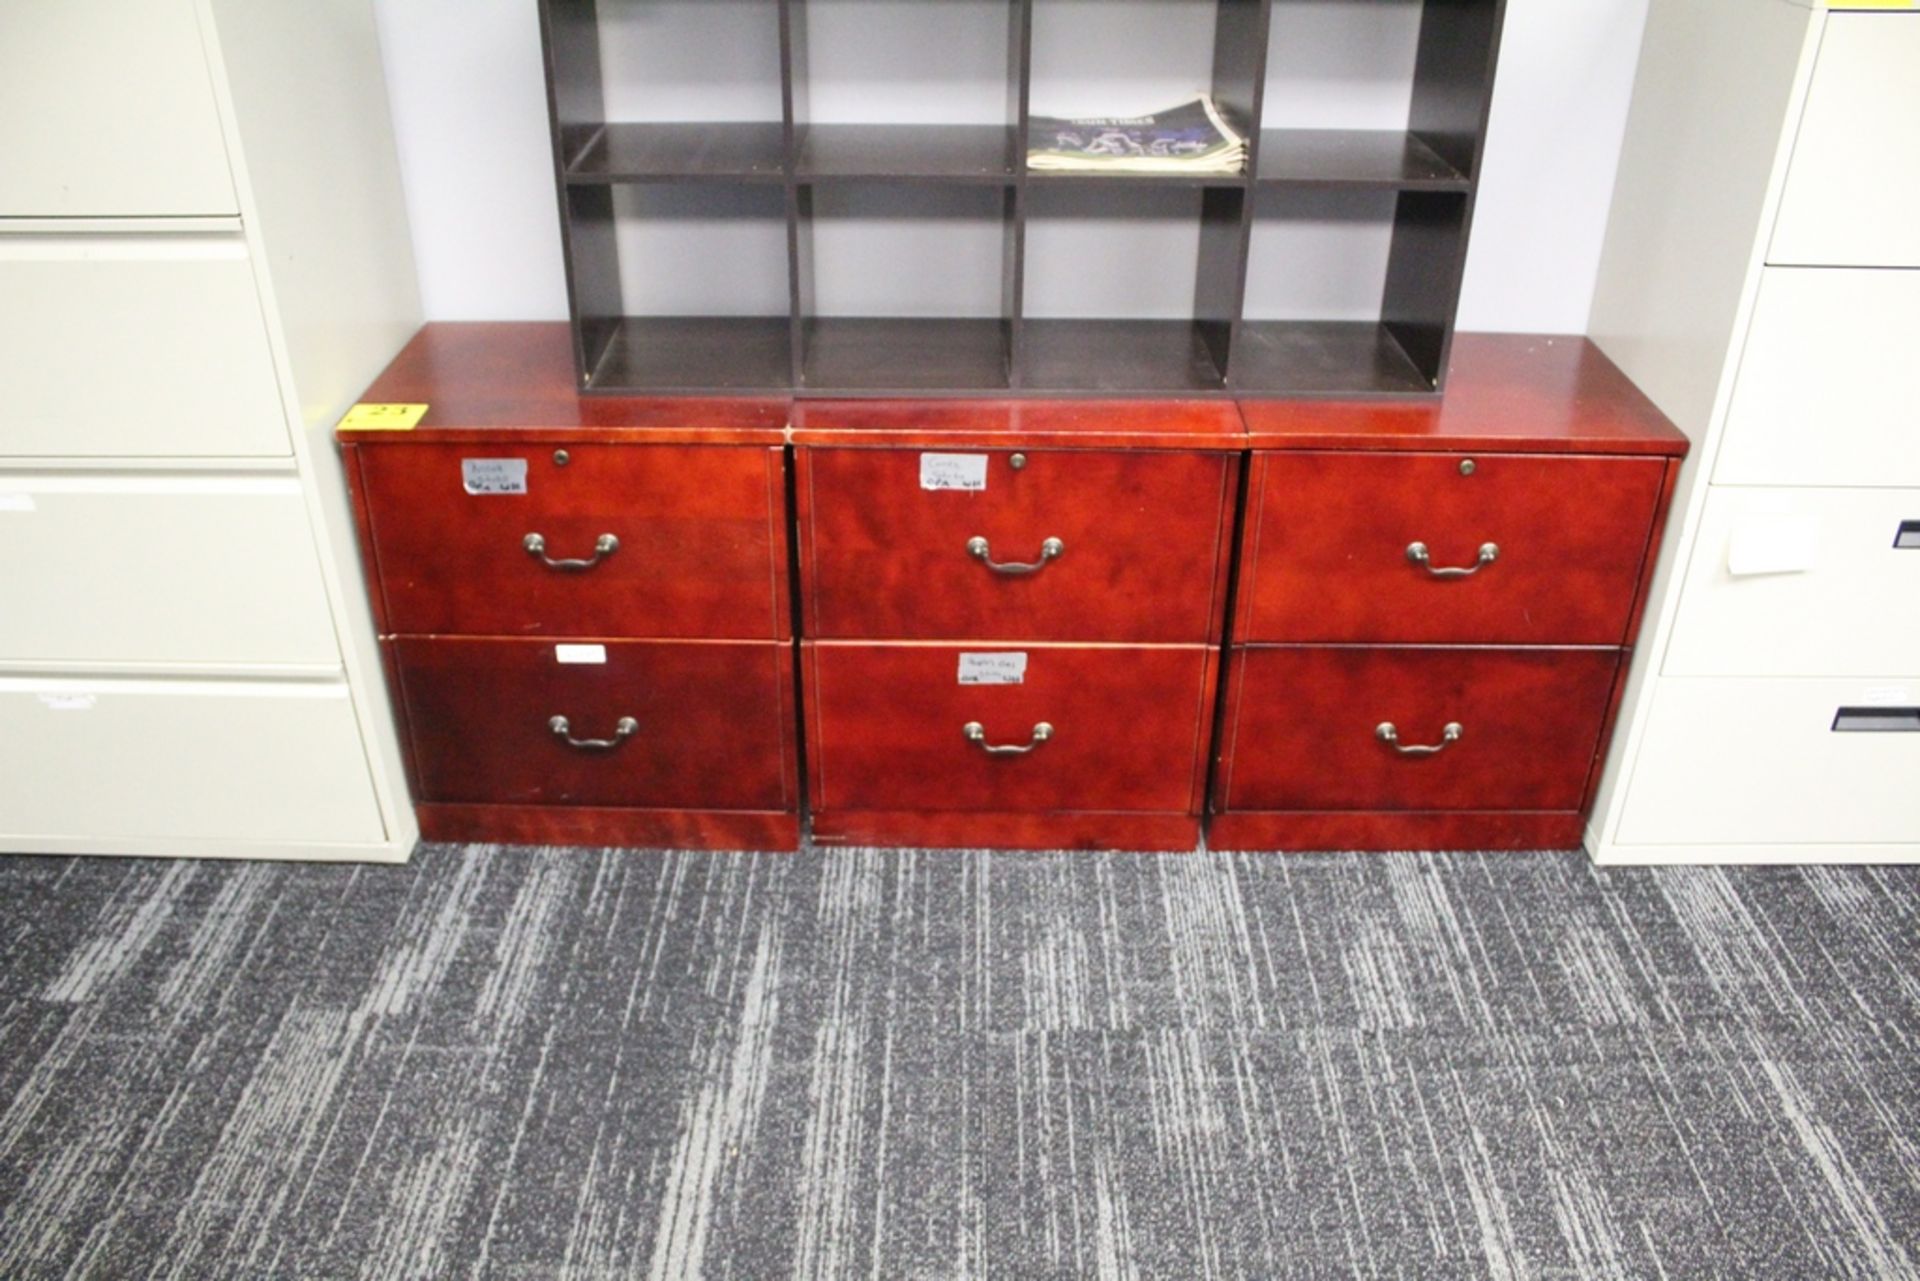 FOUR DRAWER LATERAL FILE CABINET - 50" X 30" X 18"